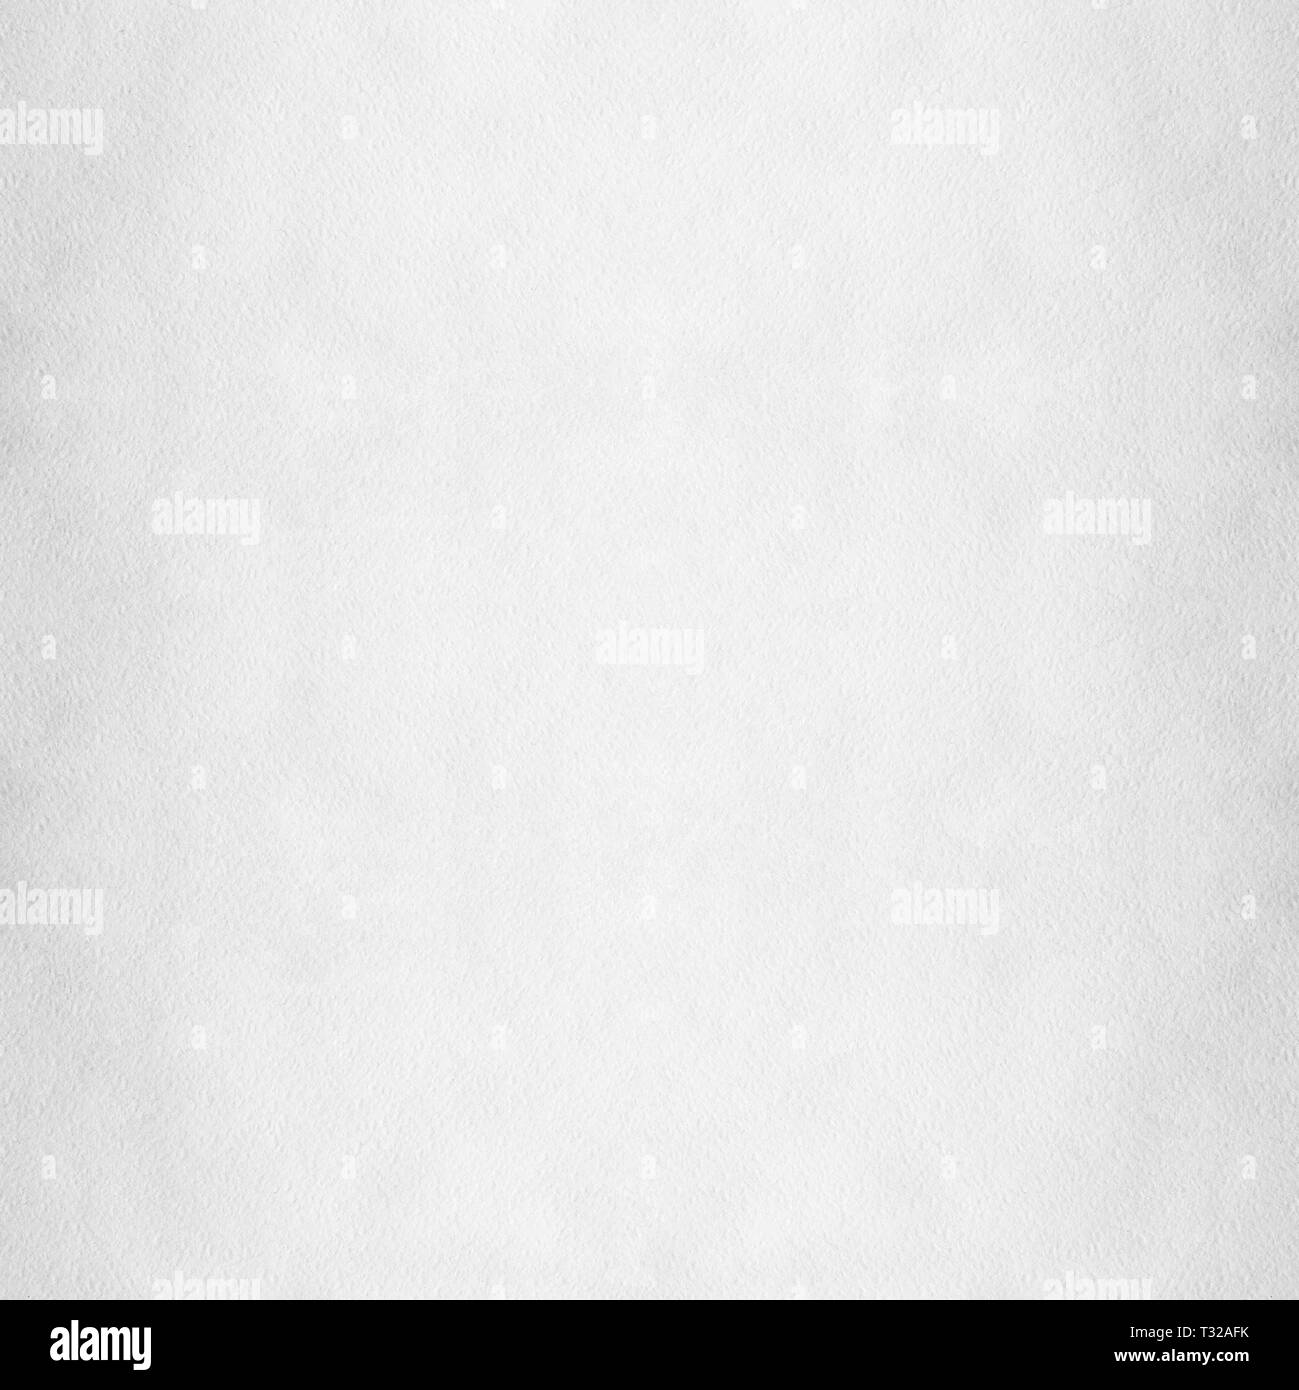 White Texture. Watercolor Paper Texture. White Background. Stock Photo